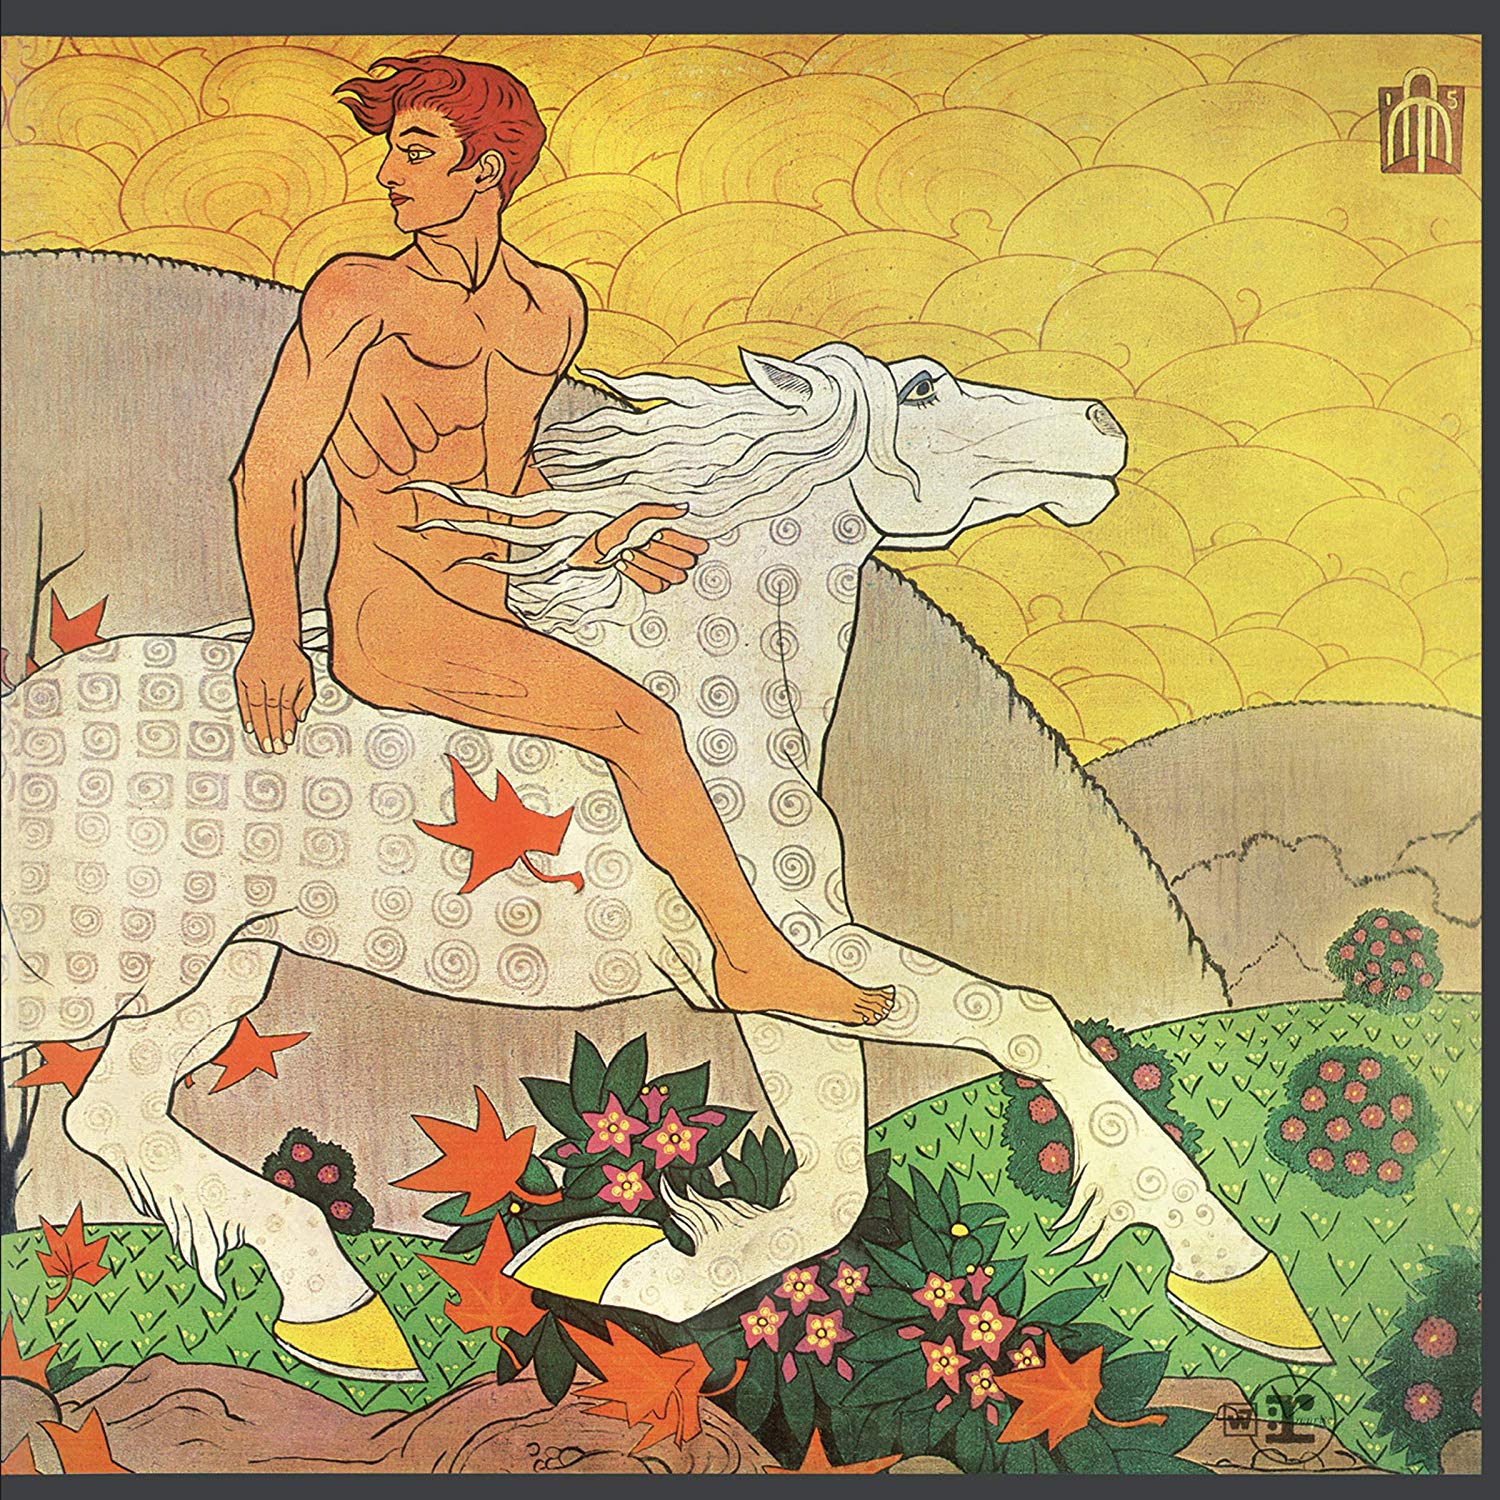 Fleetwood Mac - Then Play On (Expanded Edition / Remastered) (1969/2013/2018) [FLAC 24bit/96kHz]